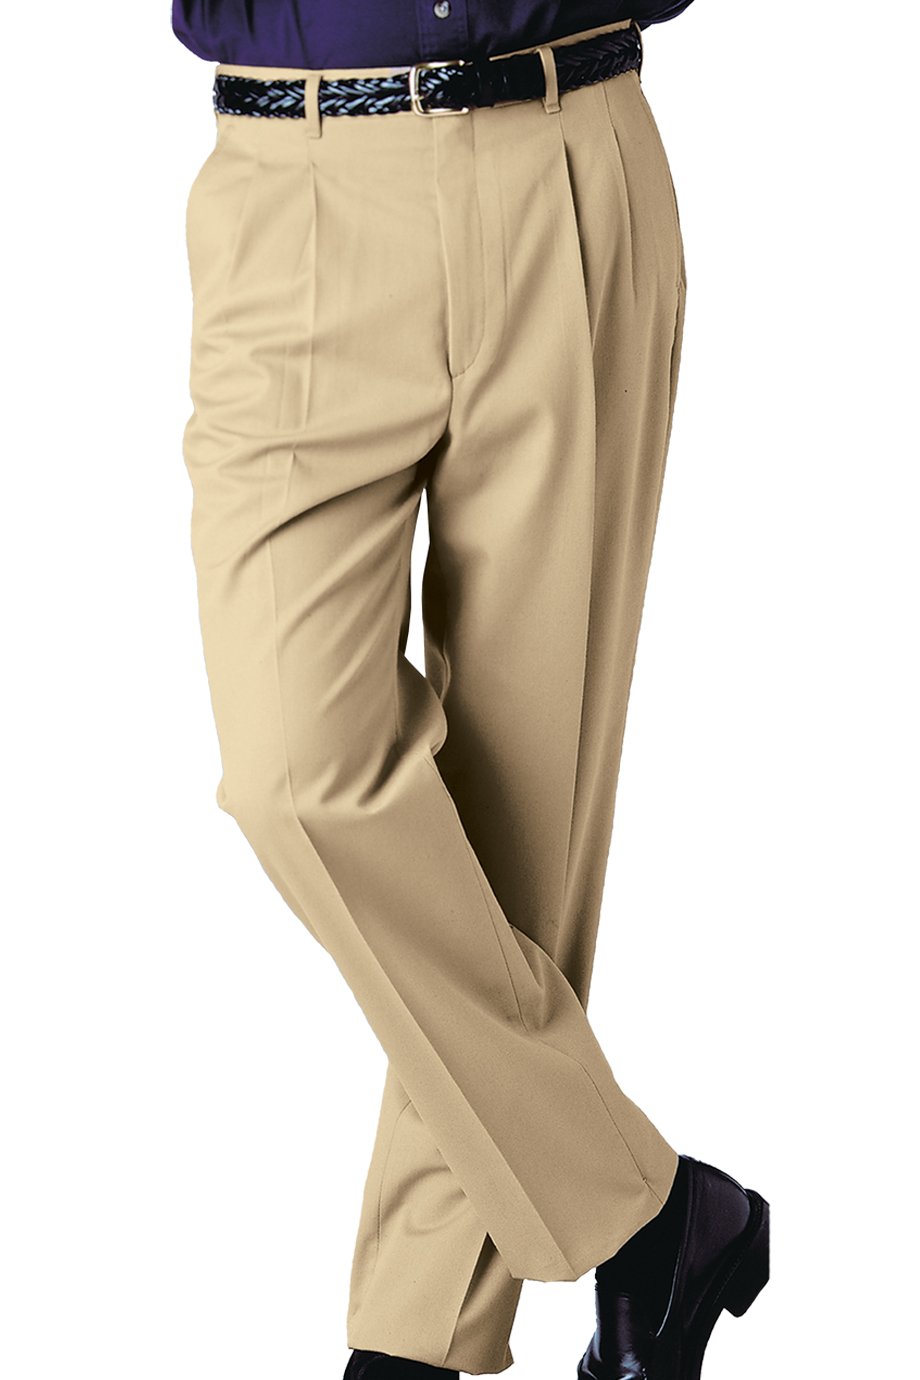 Edwards Big & Tall  Business Casual Pleated Pant -Online Exclusive